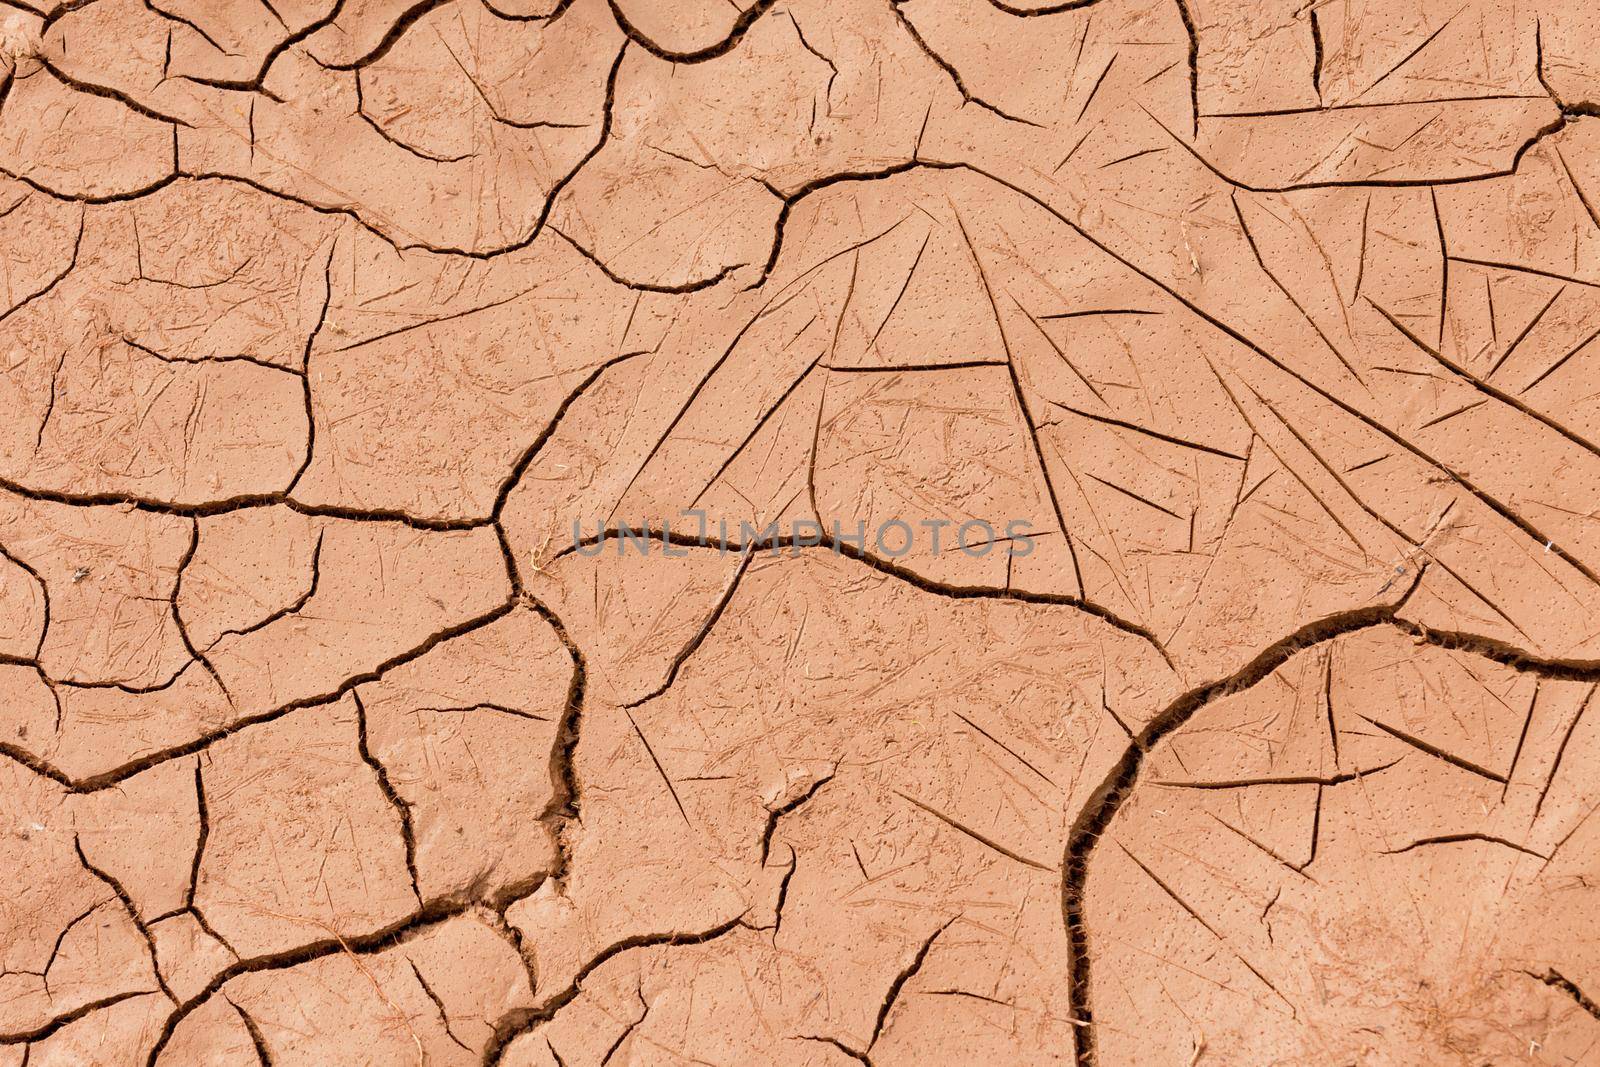 Cracked dry earth or mud environmental background texture pattern conceptual of drought and natural disaster